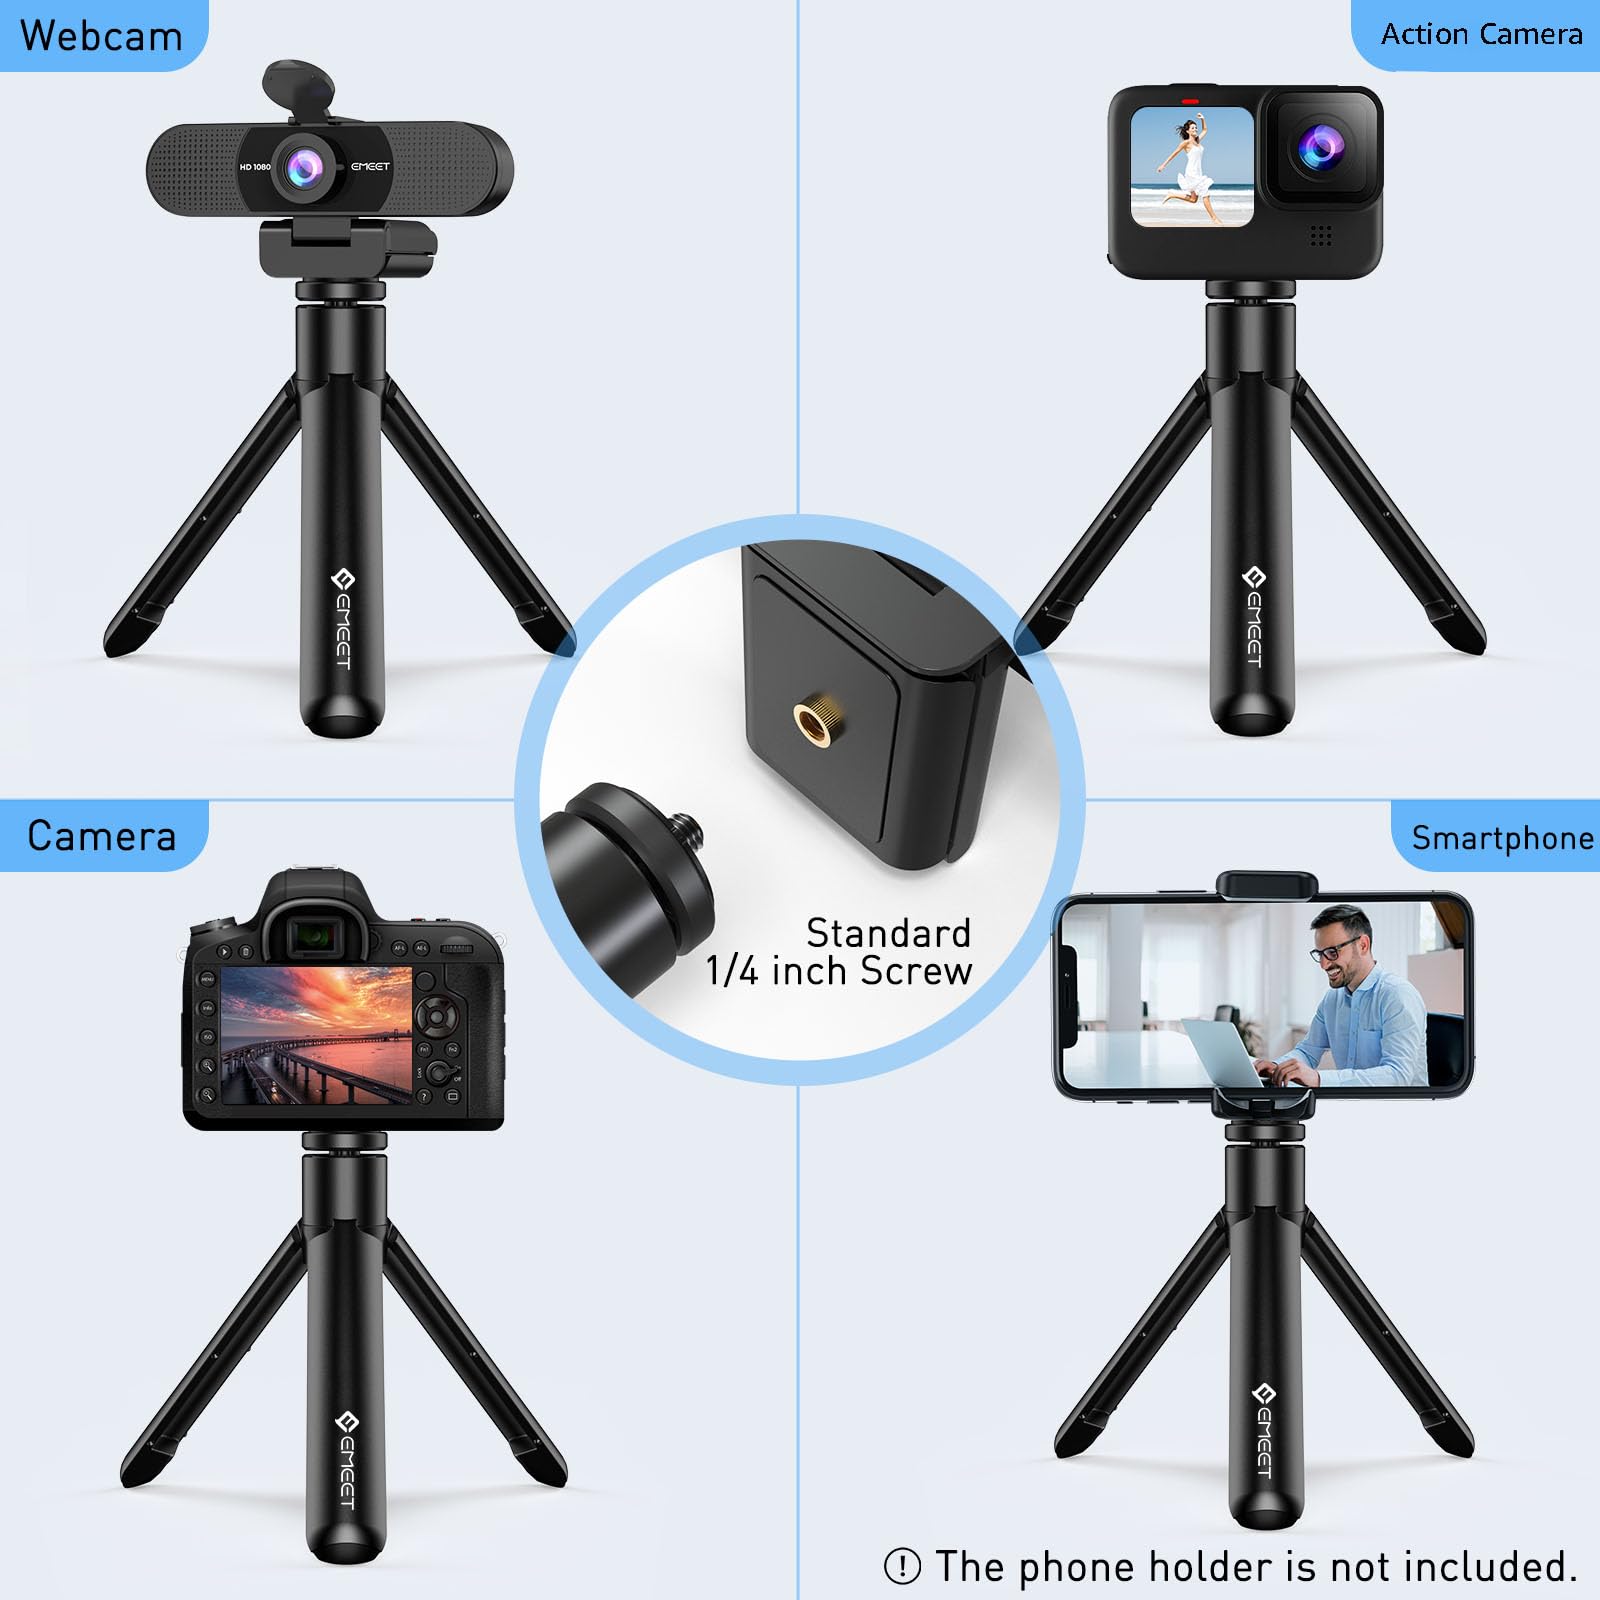 EMEET C960 Webcam with Tripod, 1080p with Microphone, Adjustable Height Mini Tripod, C960 Web Camera with Privacy Cover, Plug & Play Webcam with Stand for Zoom/Skype/YouTube/FaceTime